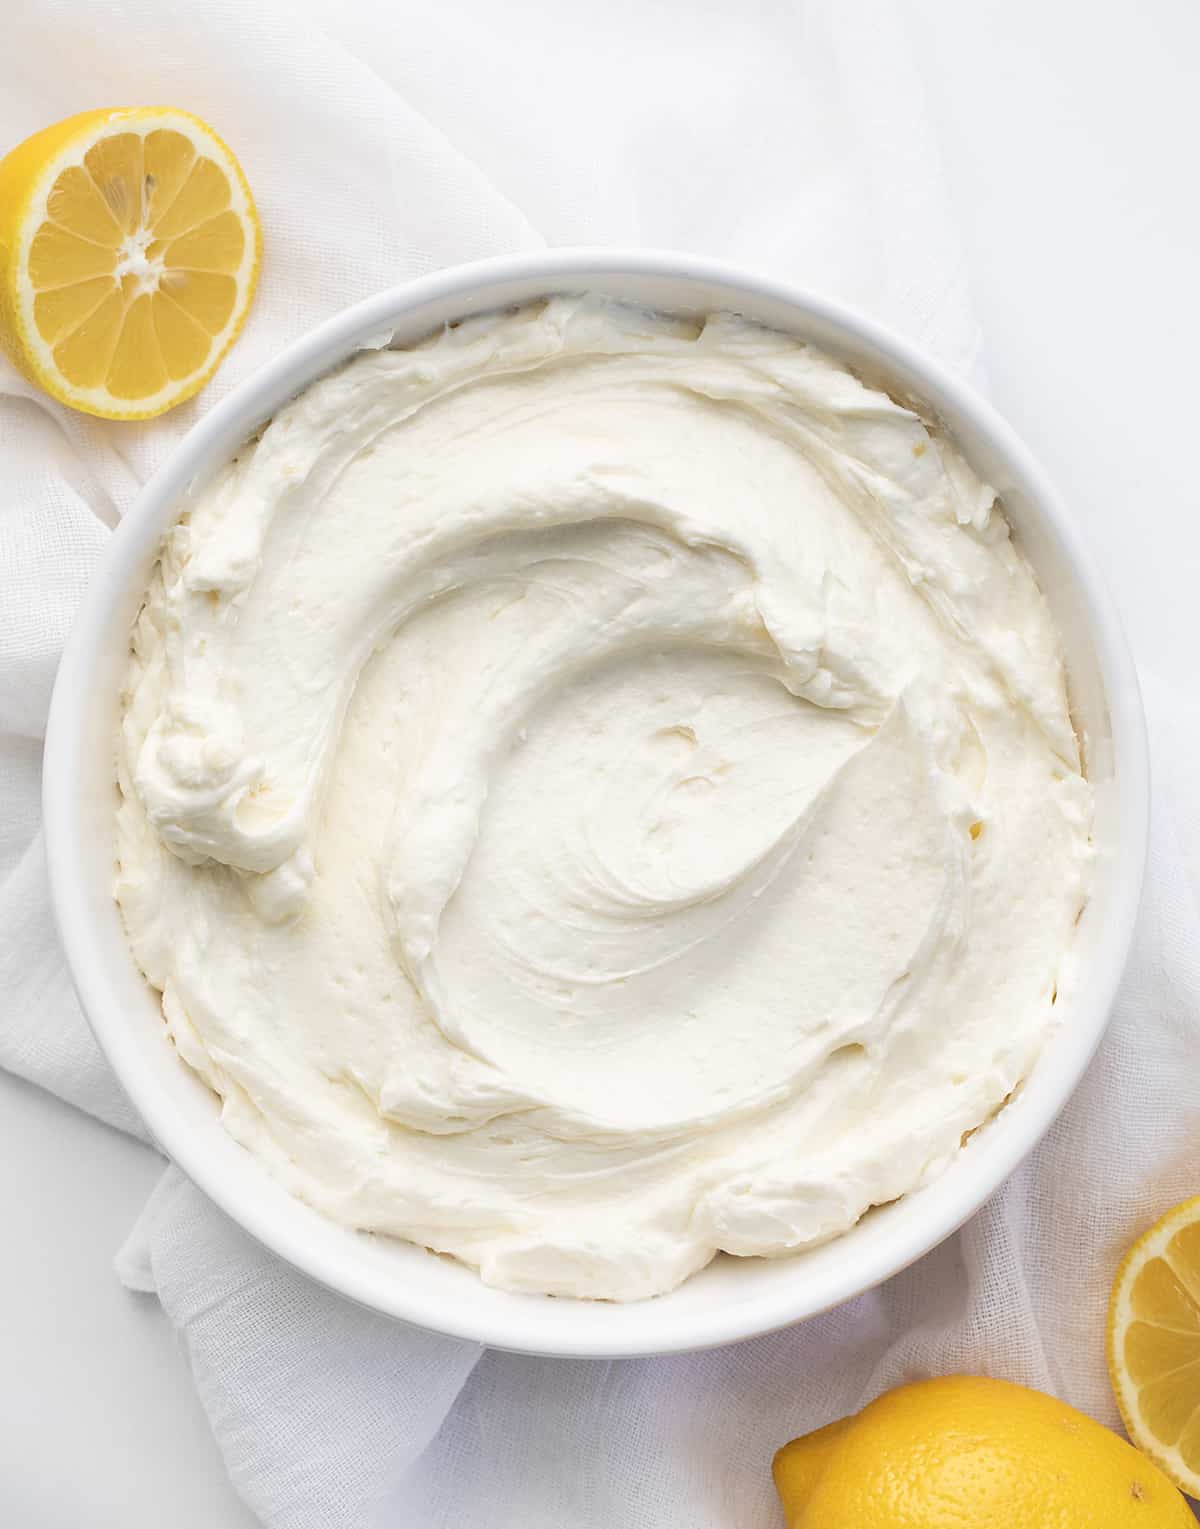 Bowl of Lemon Ermine Frosting Smoothed Out with Lemons around.